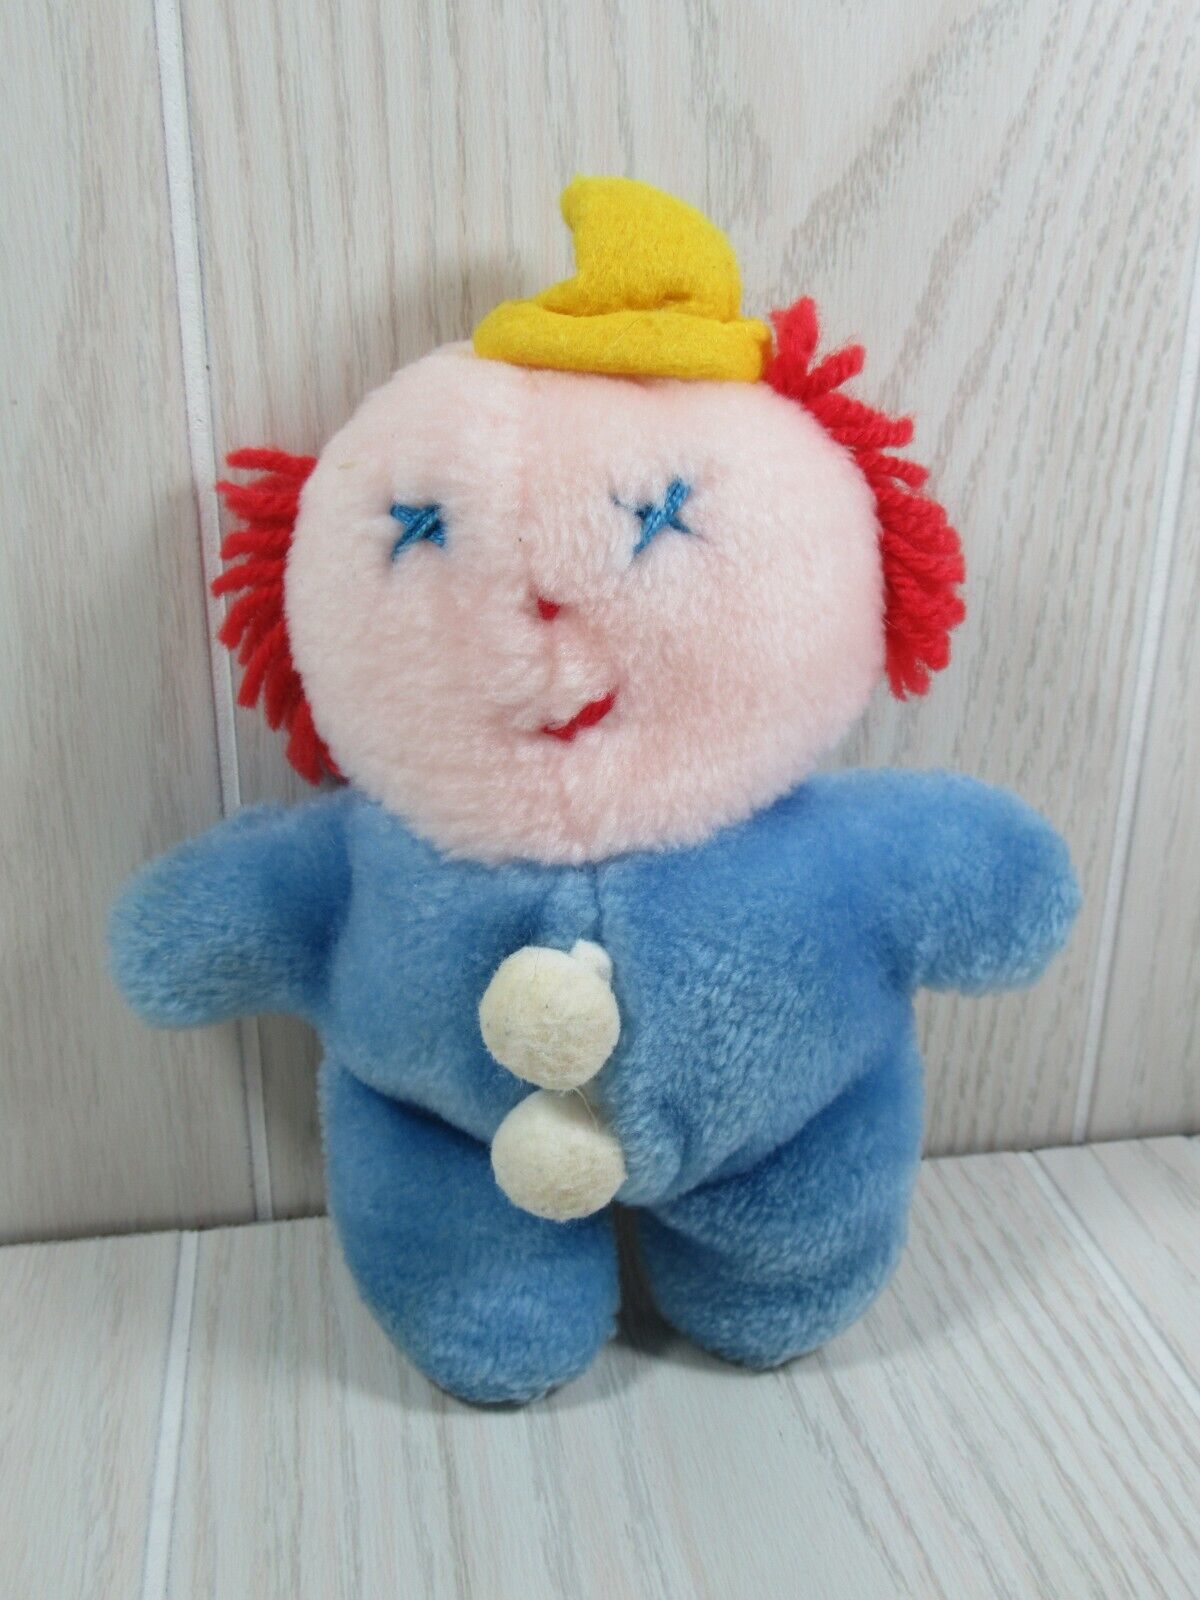 Eden vintage plush baby rattle clown small blue white red yarn hair yellow hat - $39.59